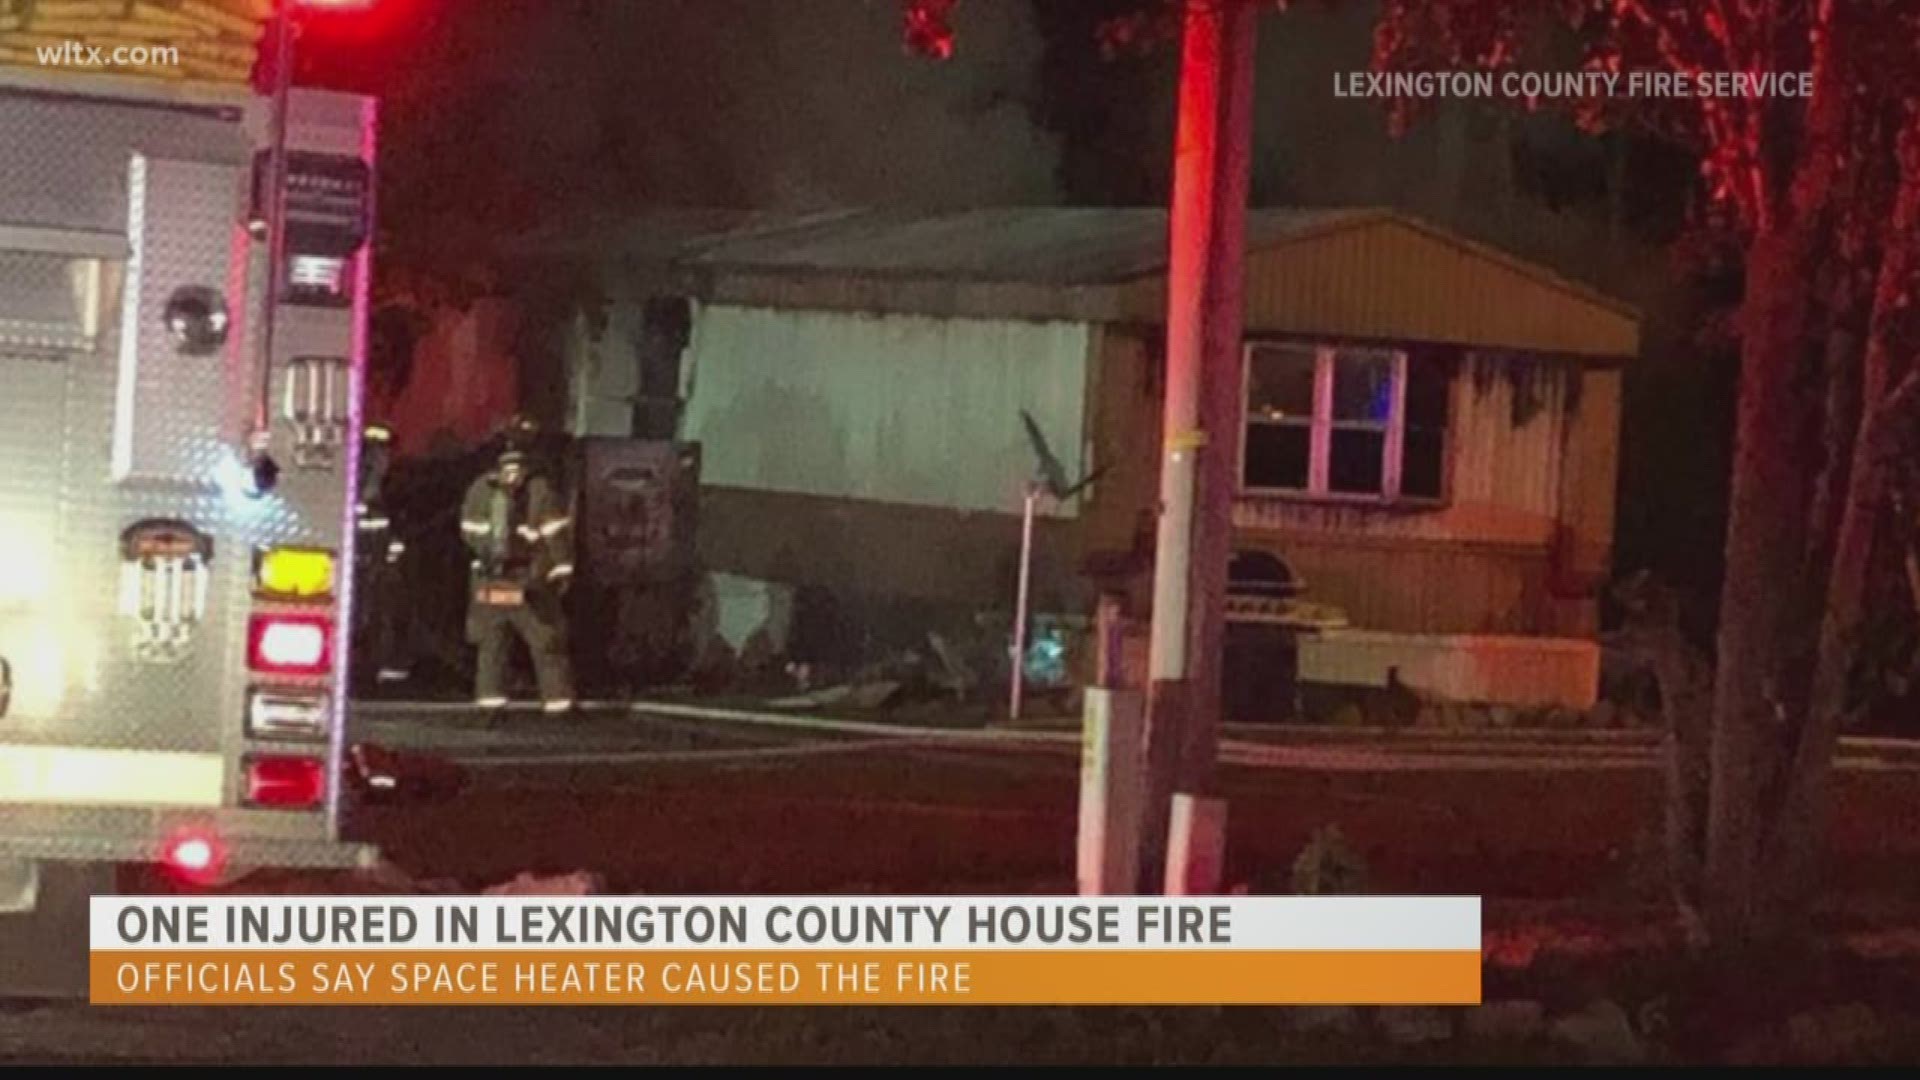 Lexington County fire crews responded to a mobile home fire on Sunday, Nov. 10. The home was severely damaged and one person suffered minor injuries.